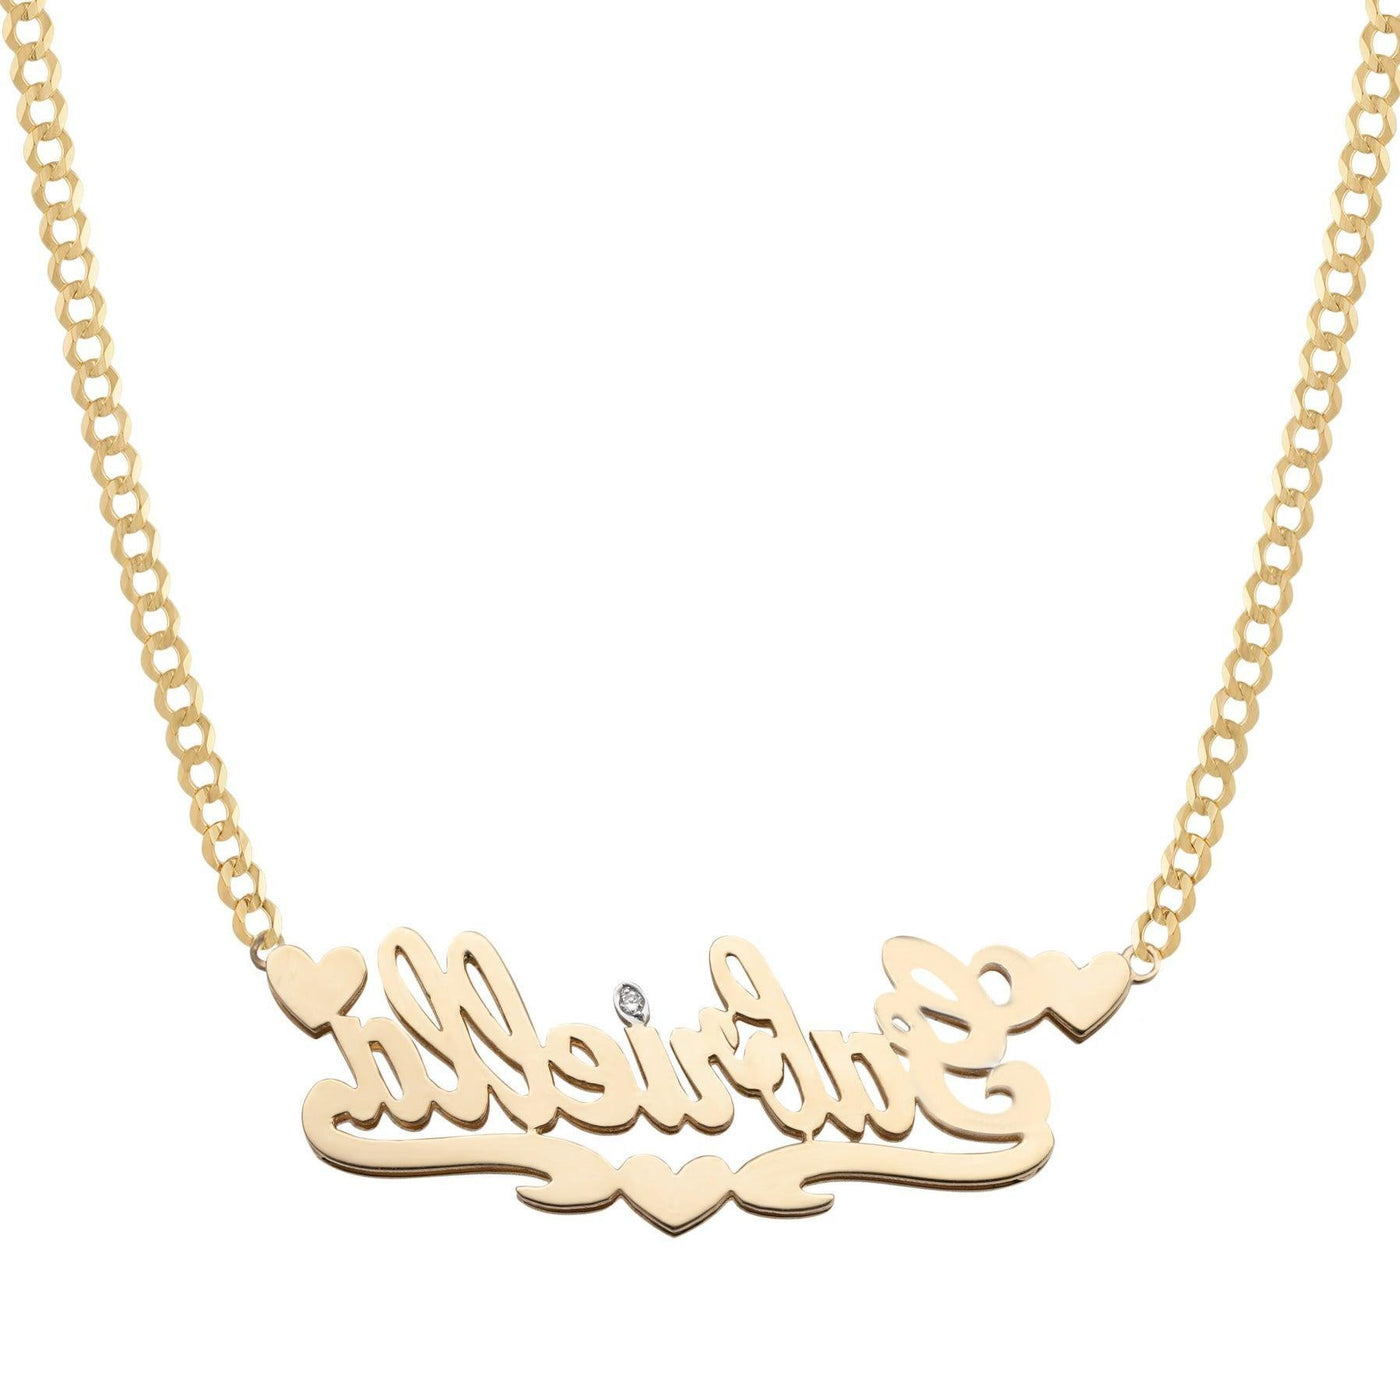 Ladies Diamond & Script Name Plate Hearts Necklace 14K Gold - Style 44 - bayamjewelry